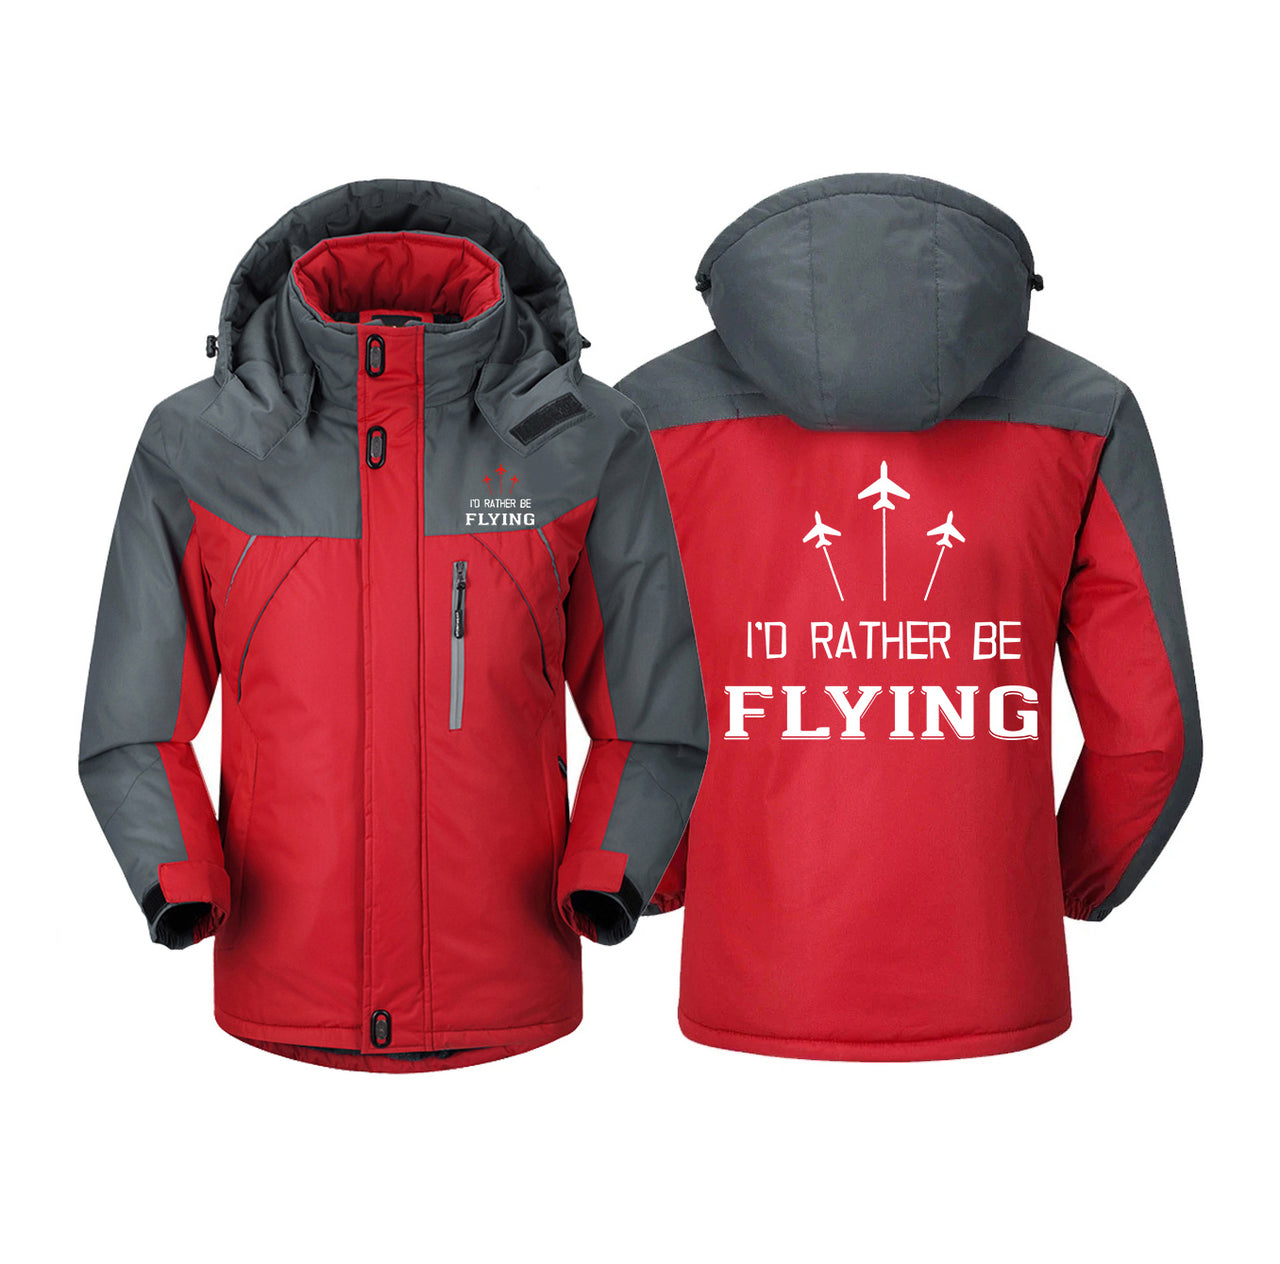 I'D Rather Be Flying Designed Thick Winter Jackets